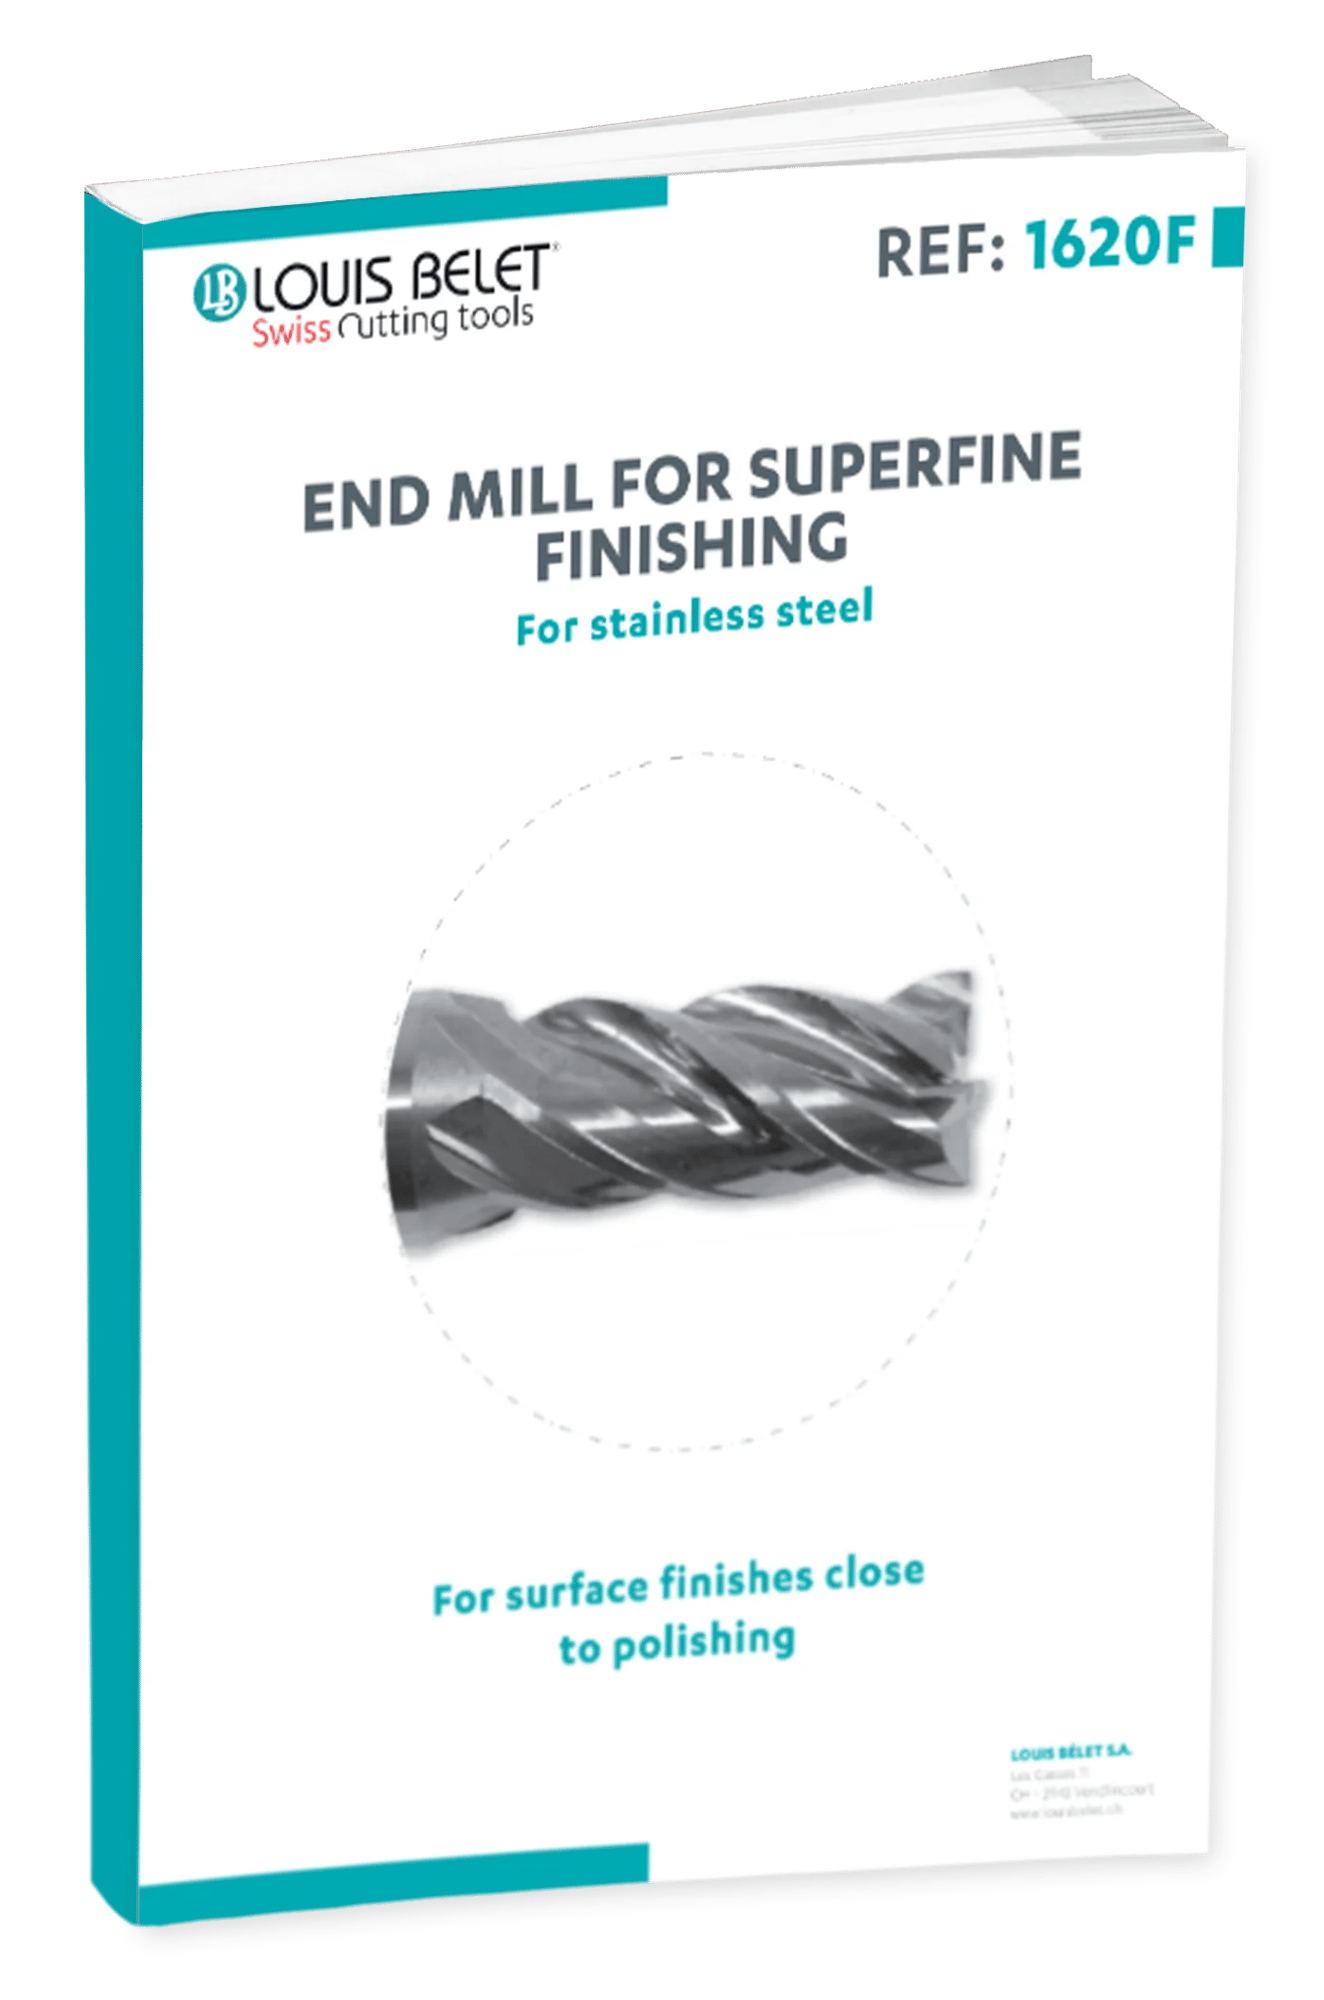 23. Louis Belet 1620F Endmill for superfine finishing SS